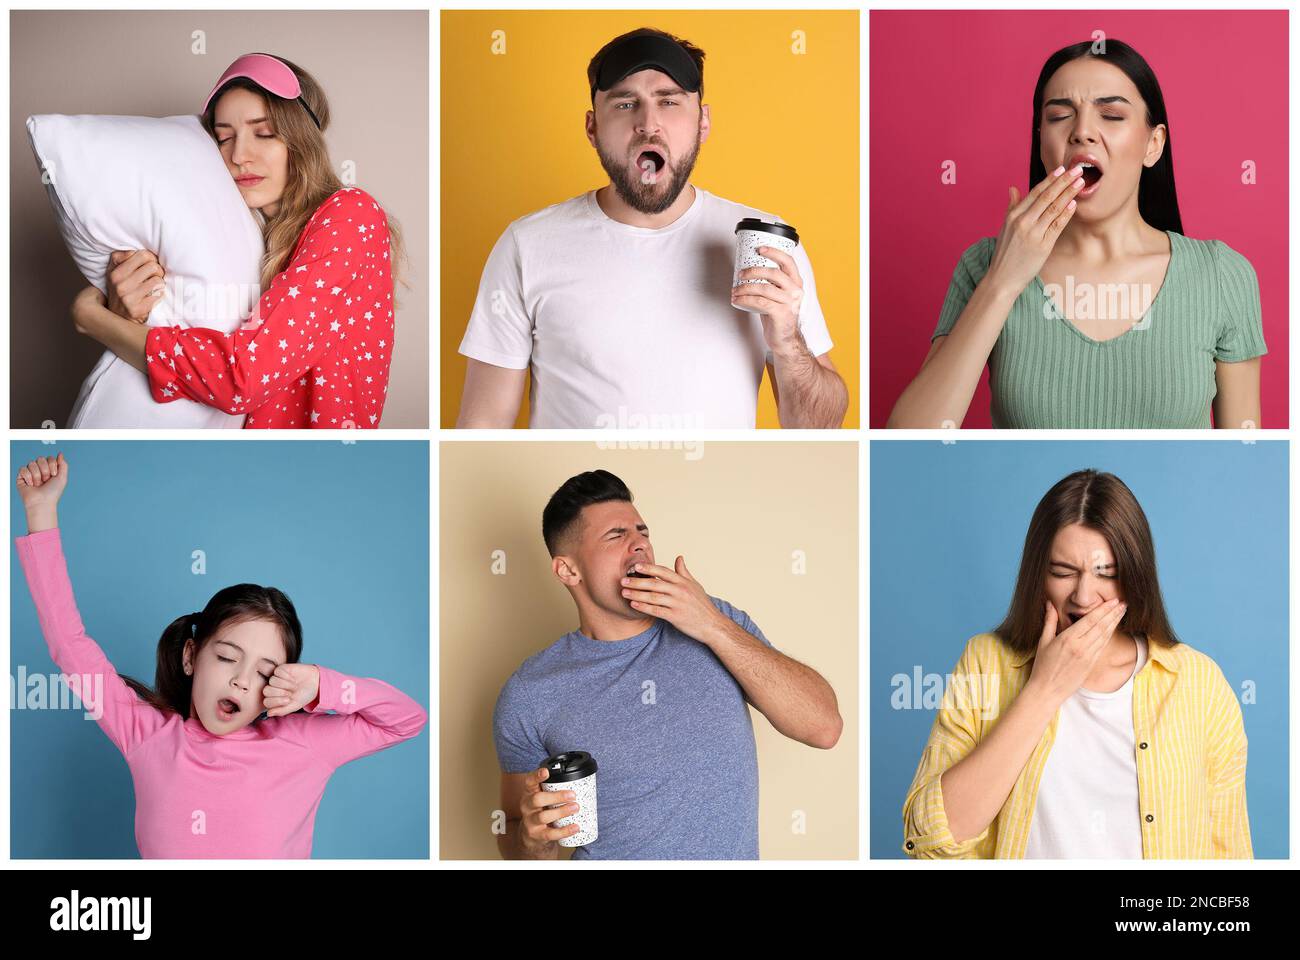 Sleepy people yawning on different color backgrounds, collage Stock Photo